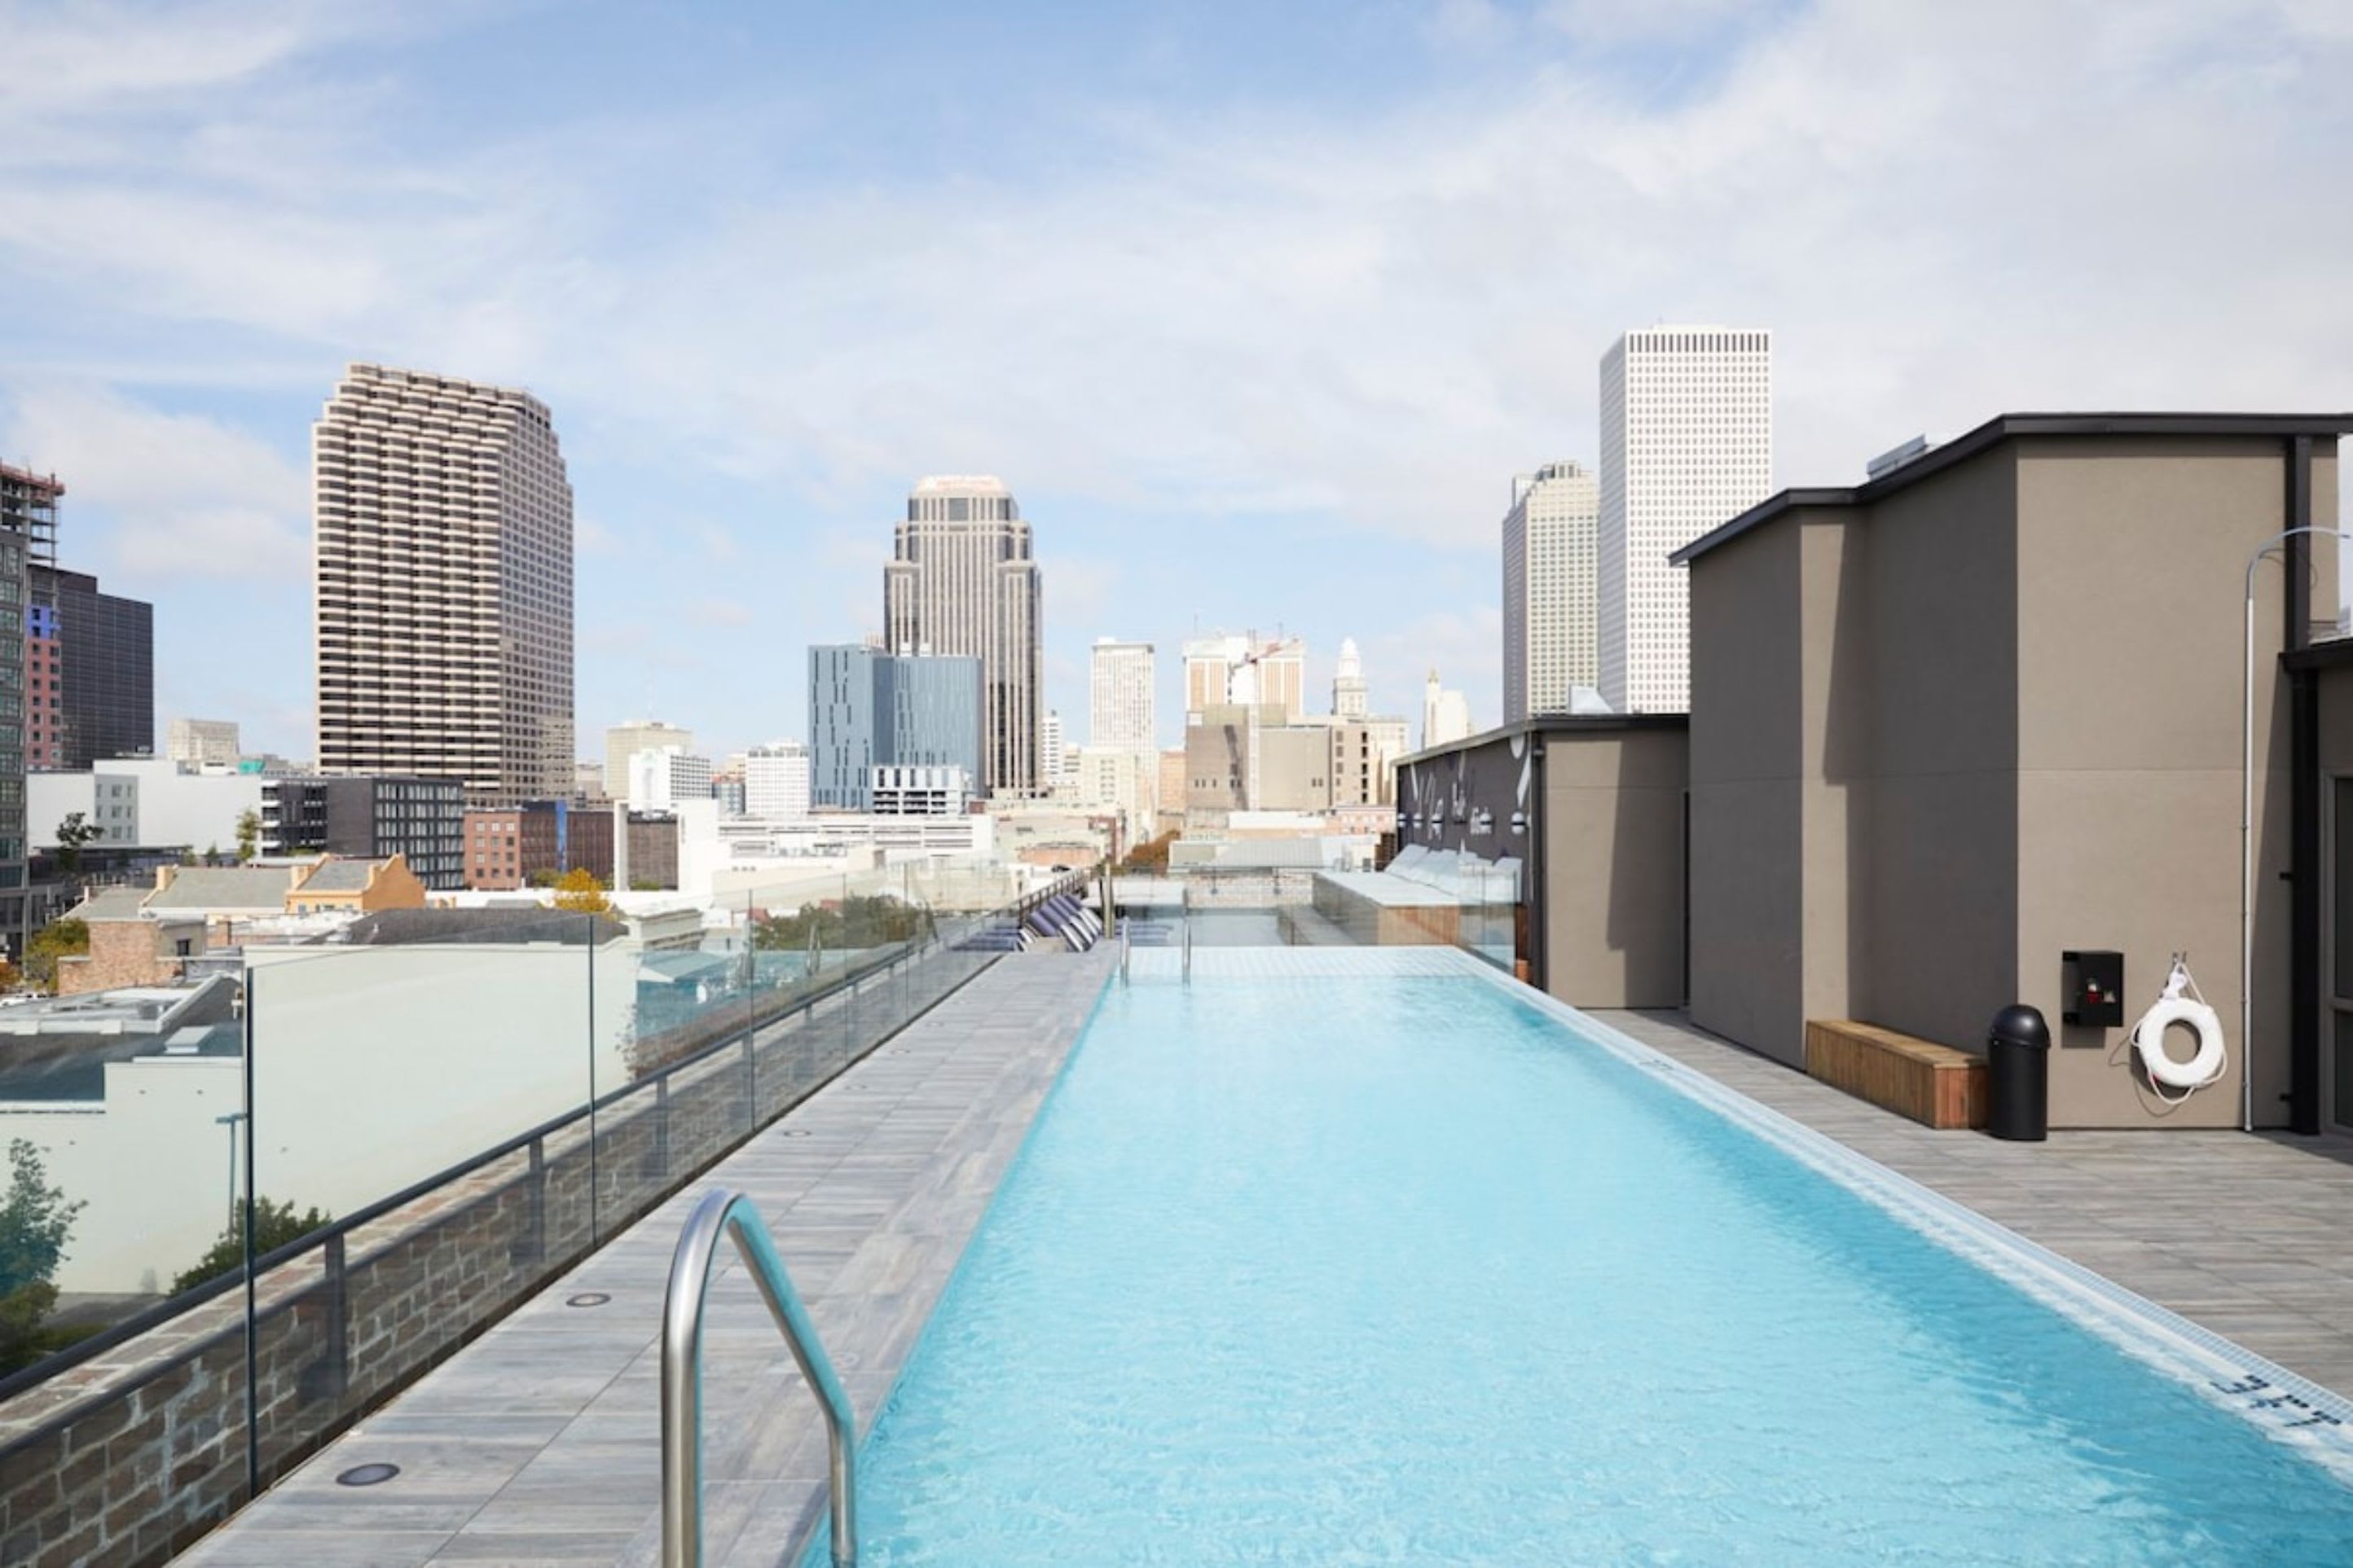 Property Image 2 - The Brandywine | Rooftop Pool | 5 min drive to Bourbon St | 2 Bed 2 Bath